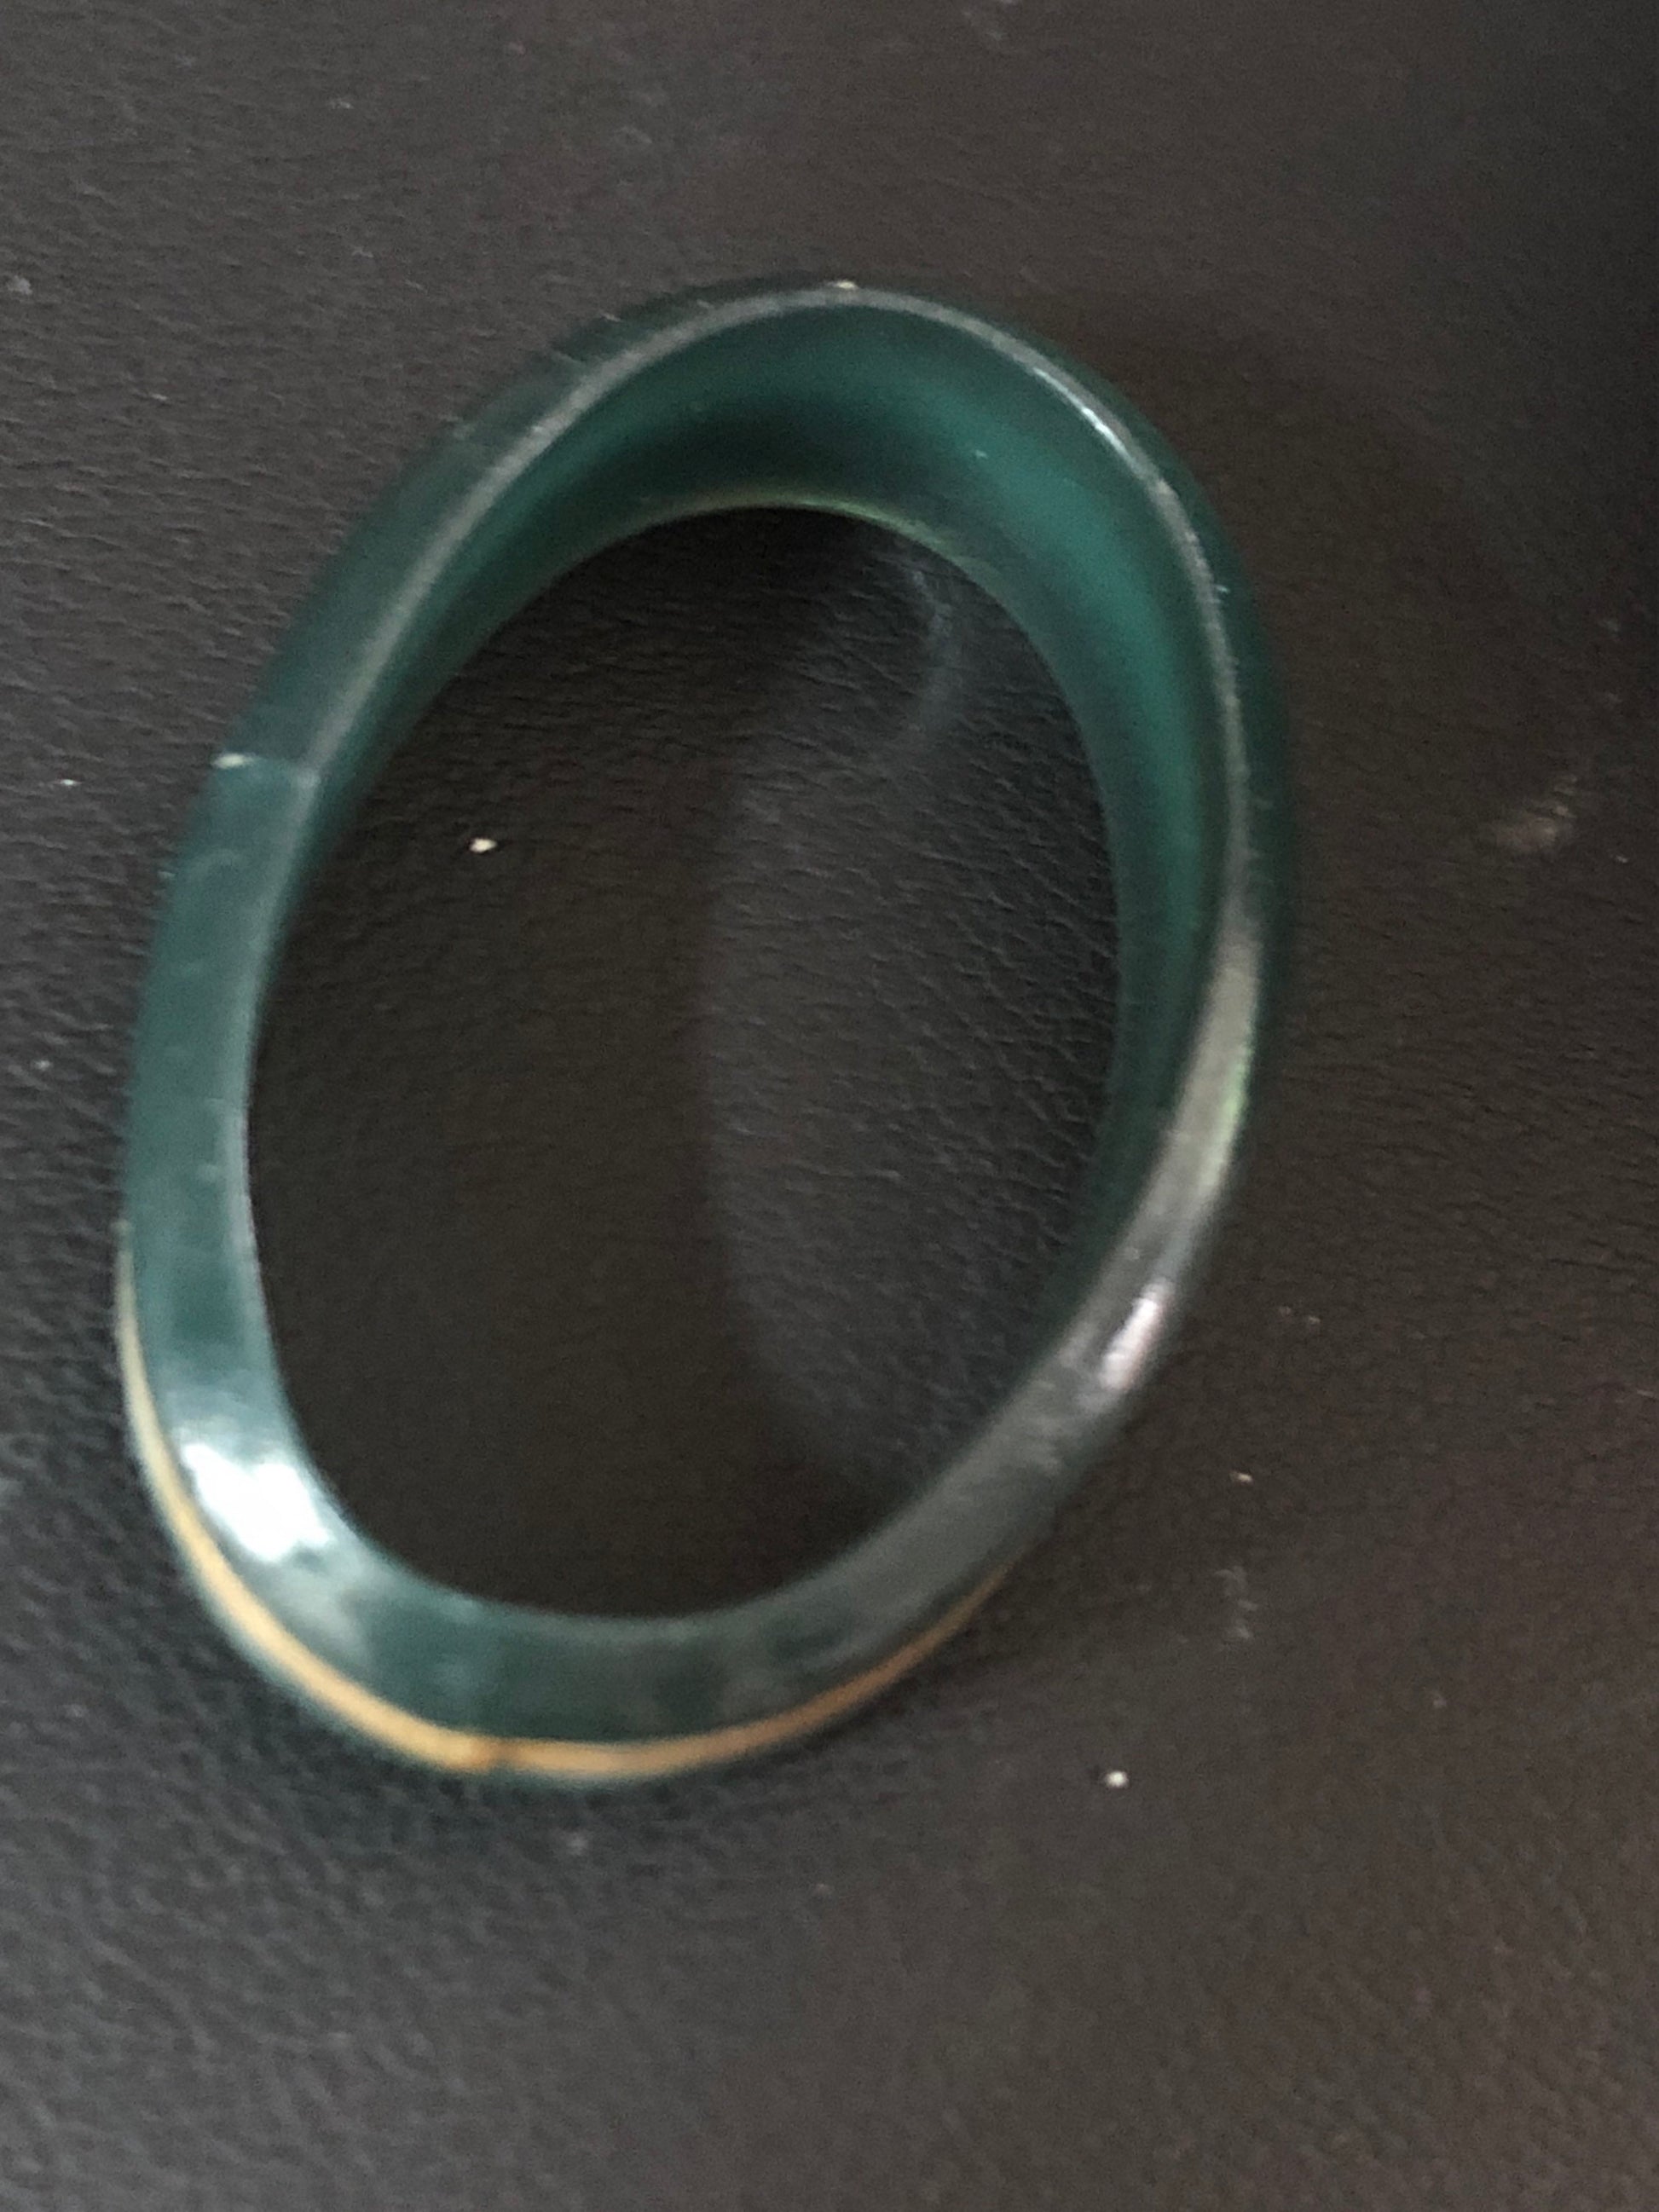 Art Deco Celluloid Early Plastic Scarf Ring Dark green Gold tone band Bakelite